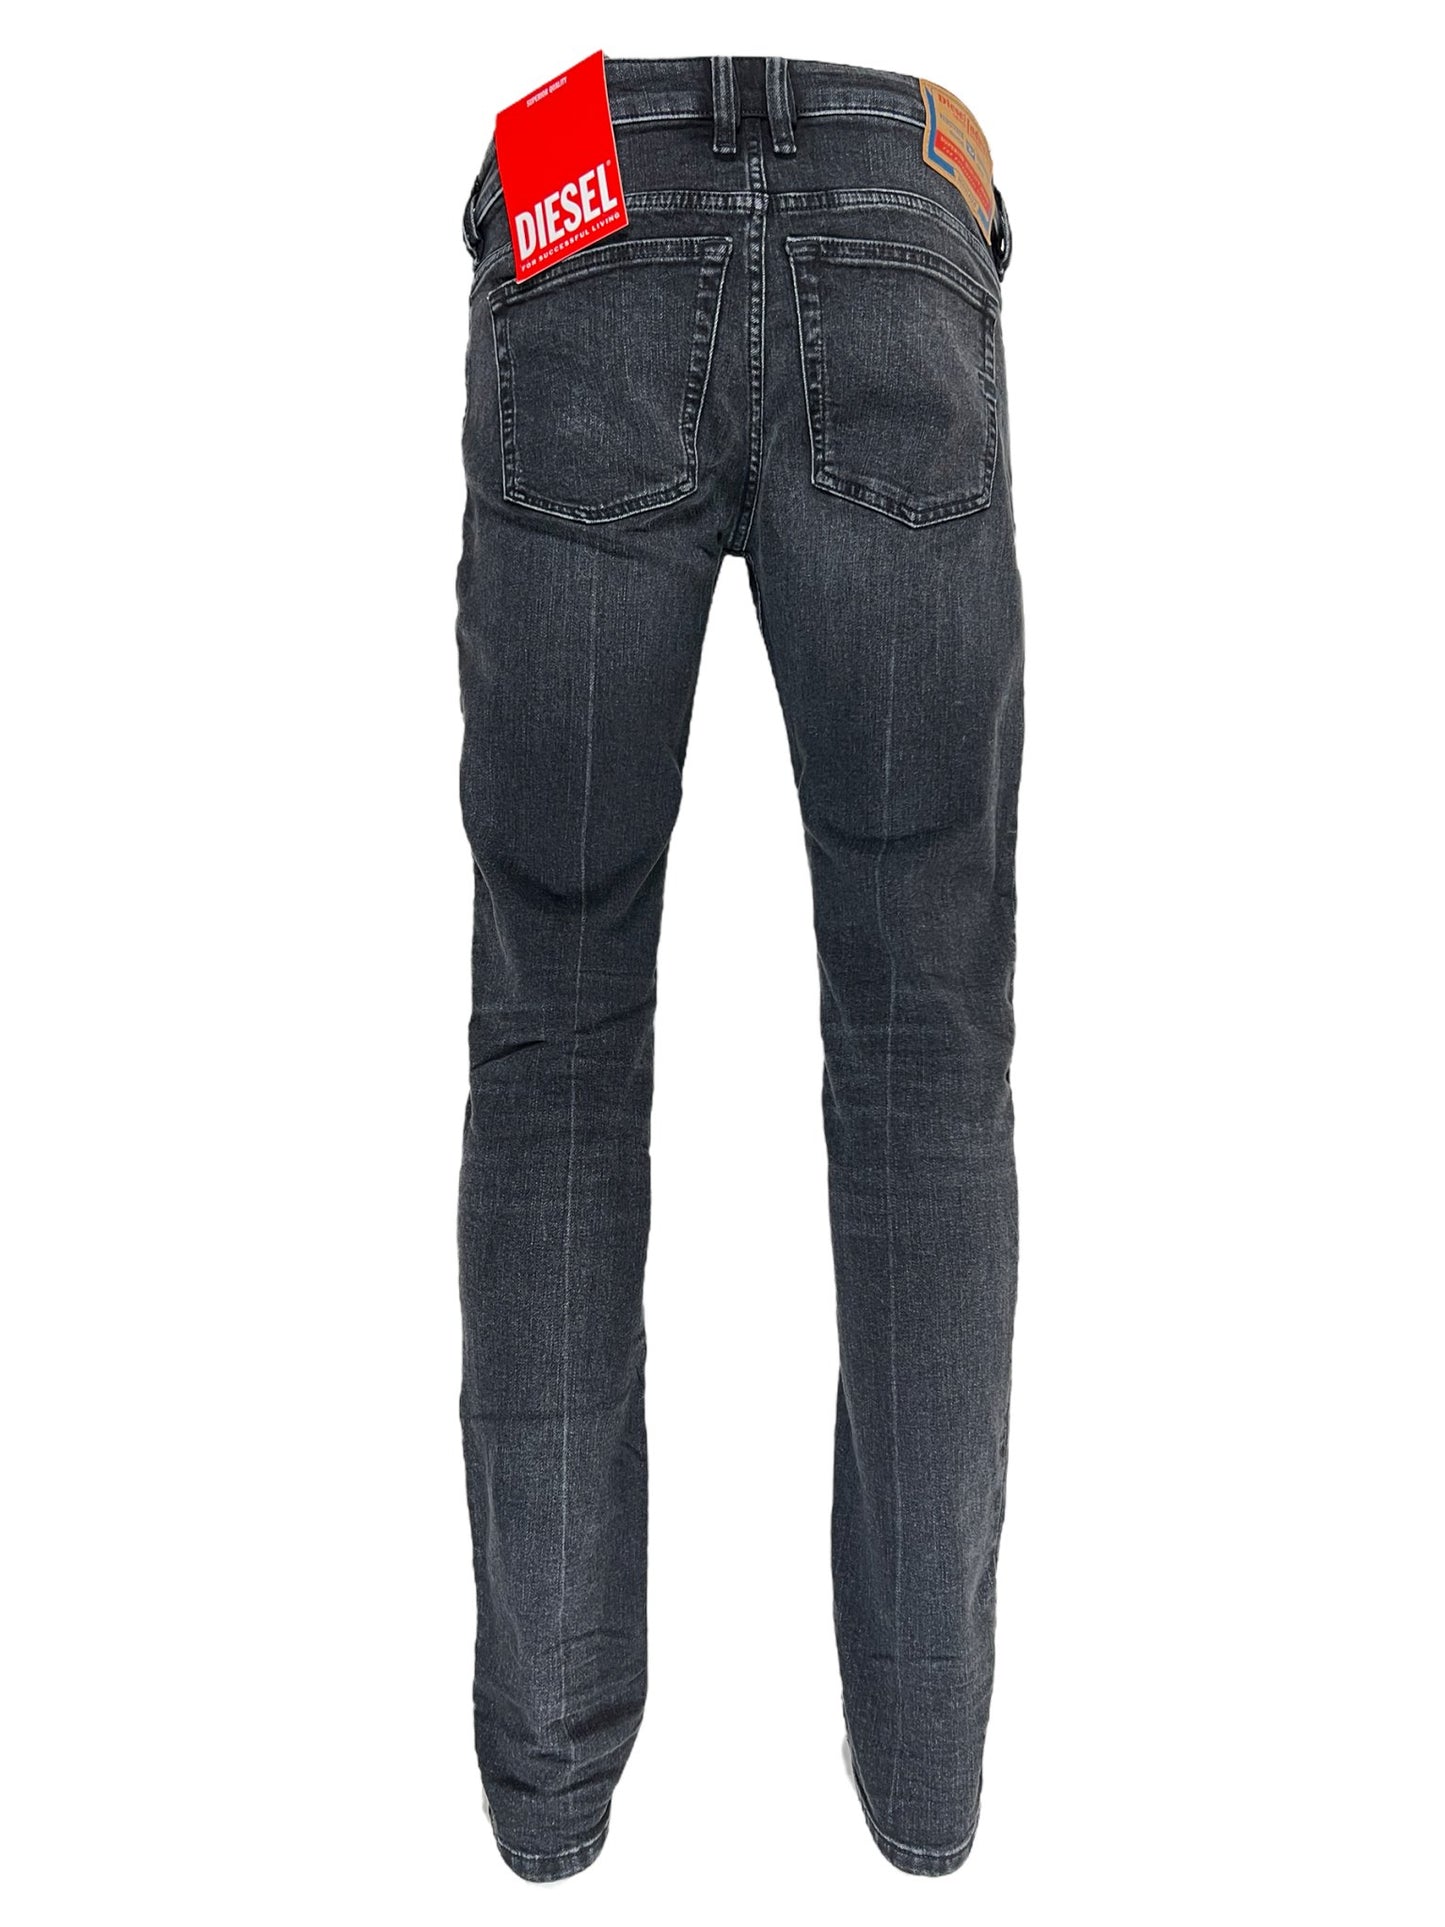 Sentence with replaced product name: Dark-wash DIESEL 1979 SLEENKER PFAX skinny jeans with a logo patch on the back waistband.